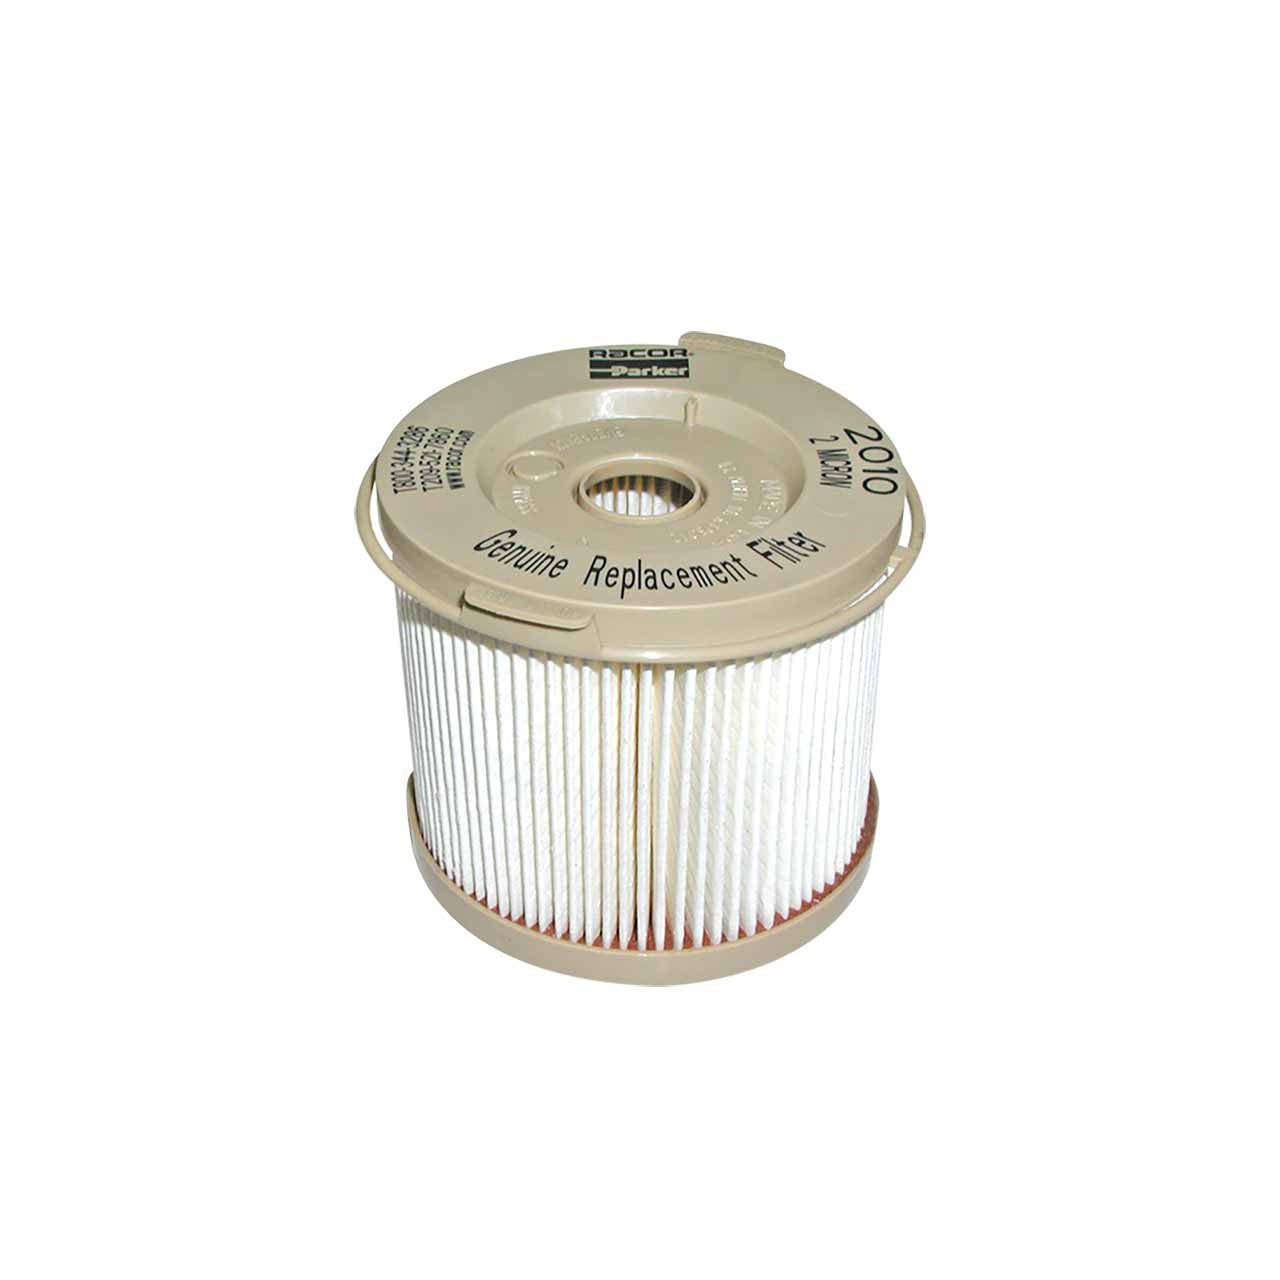 2010N-2 Racor Parker Replacement Filter Element (2 micron) 500 Turbine Series